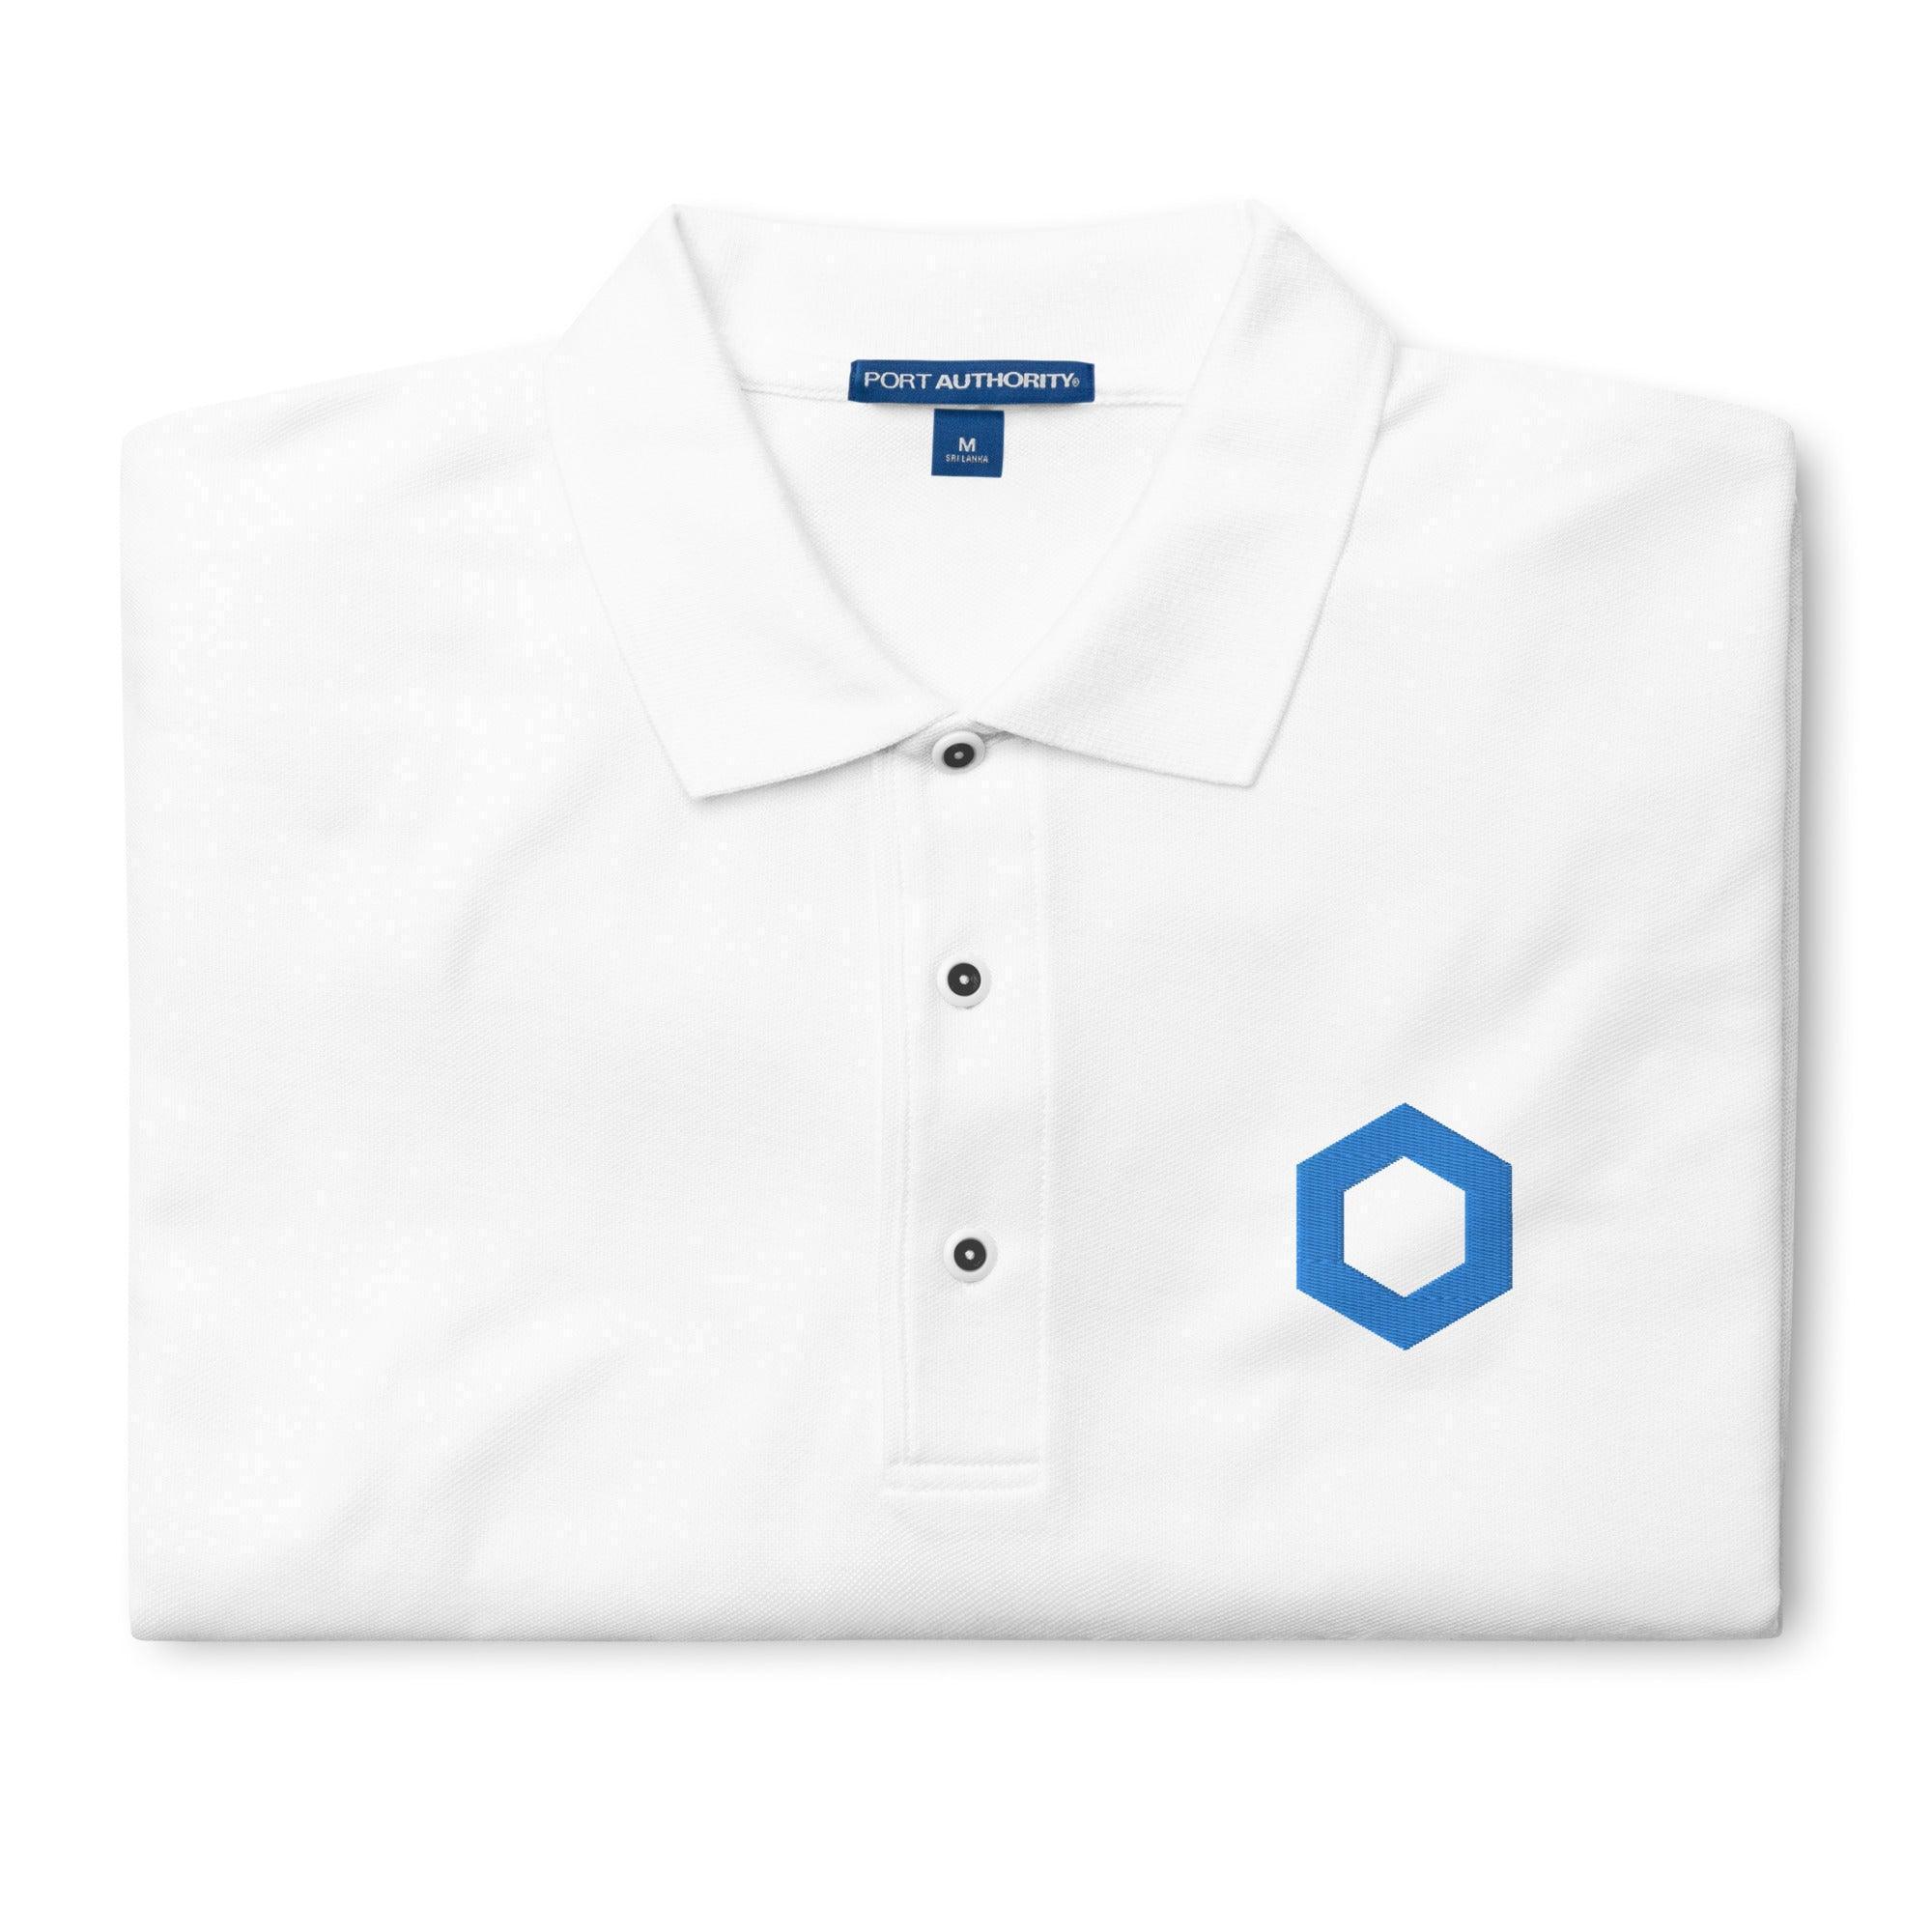 Chainlink Polo Shirt - InvestmenTees